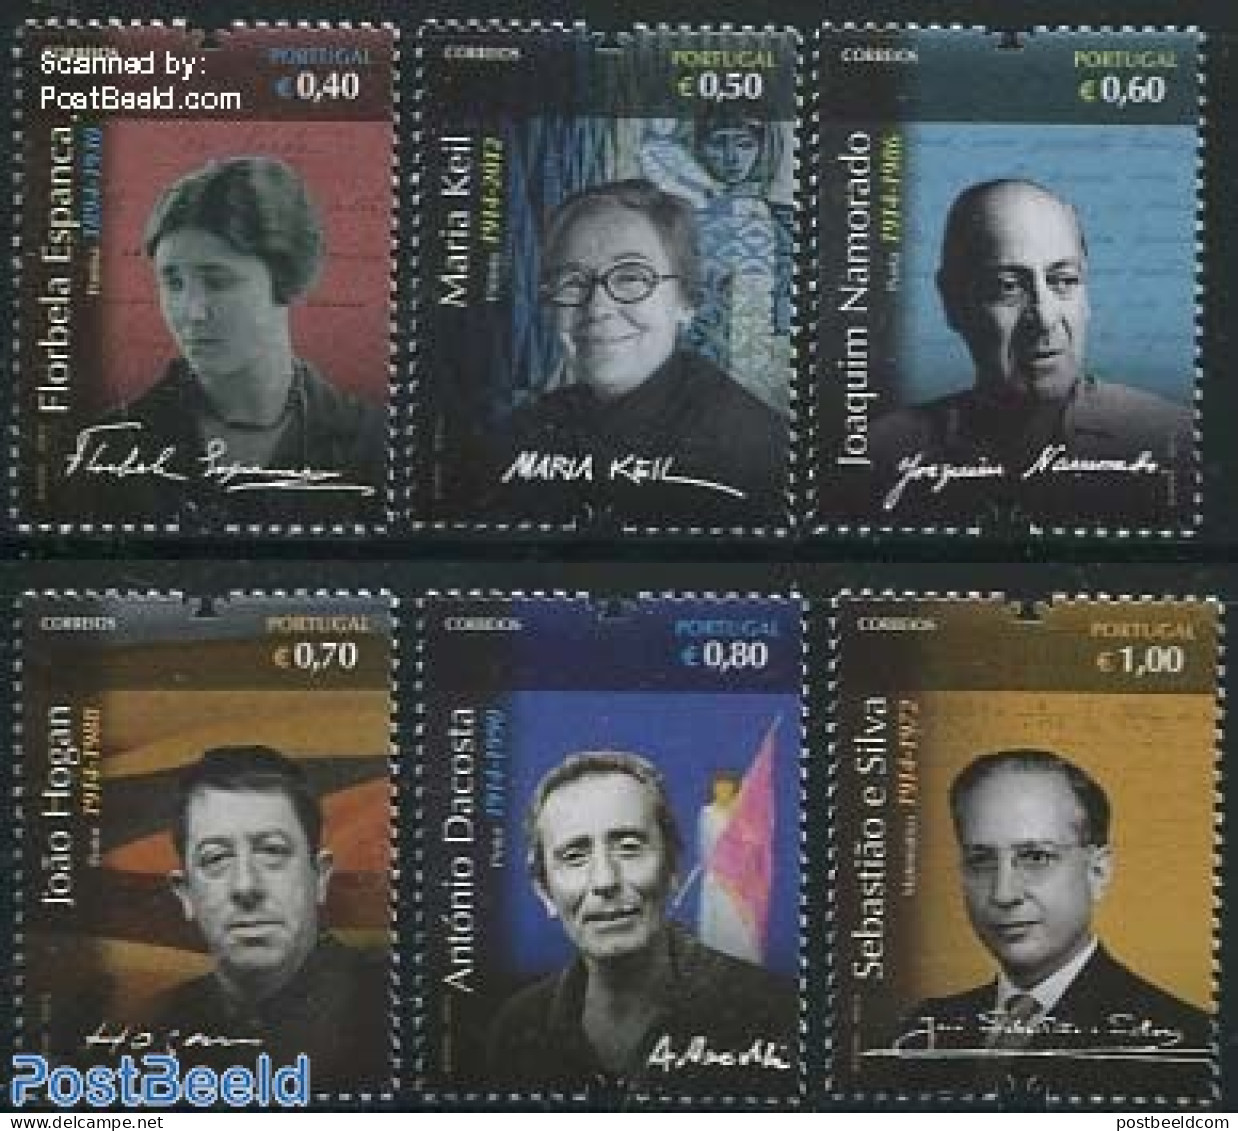 Portugal 2014 Cultural Personalities 6v, Mint NH, Authors - Ungebraucht